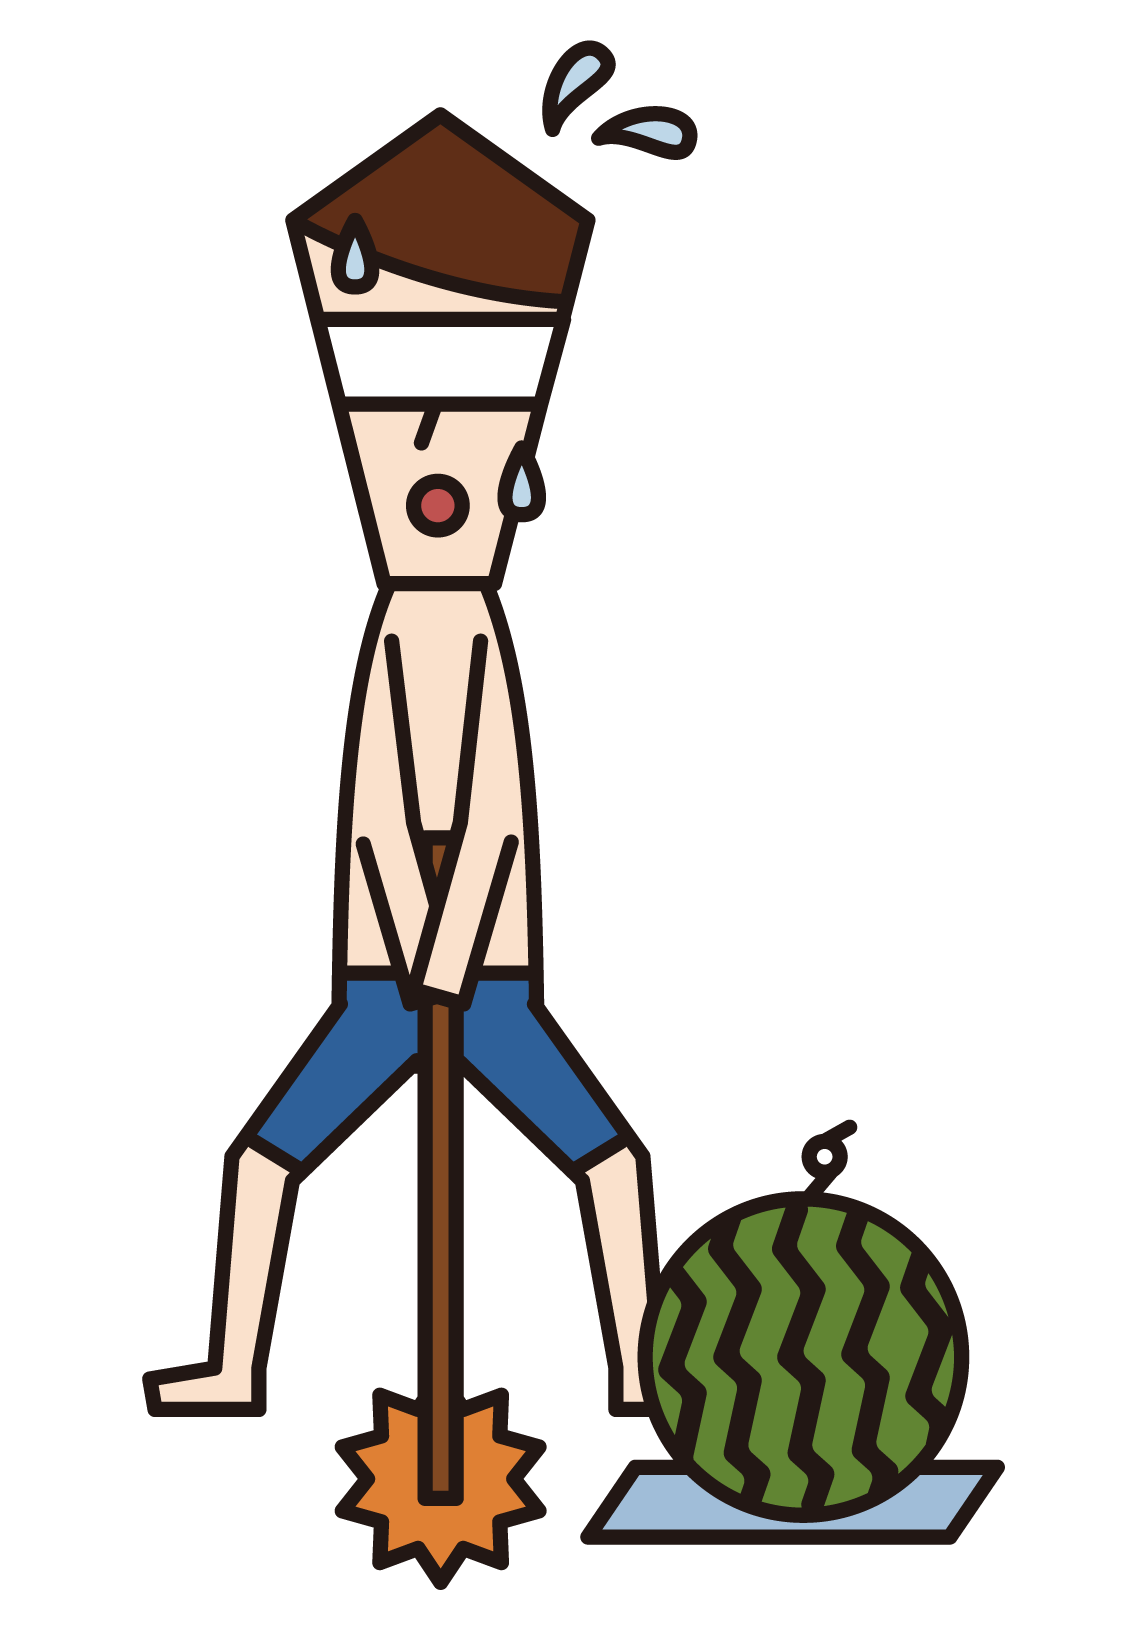 Illustration of a man who swings with a watermelon split